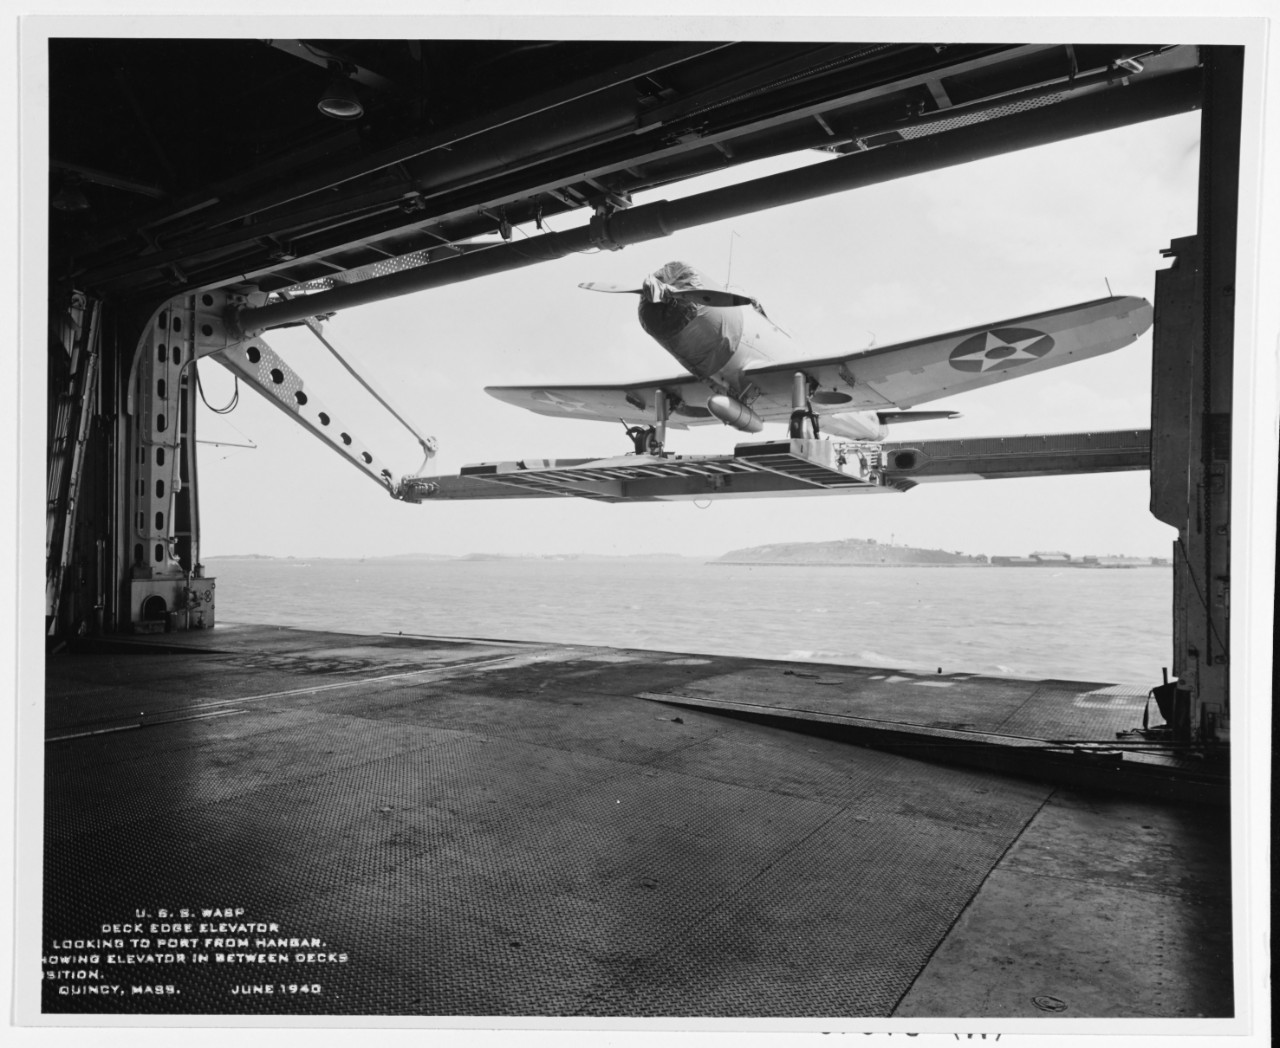 USS Wasp (CV-7). View of deck edge elevator in the between decks position, taken June 1940. Plane on elevator is a Vought SB2U “Vindicator.” Naval History and Heritage Command, NH 43466.